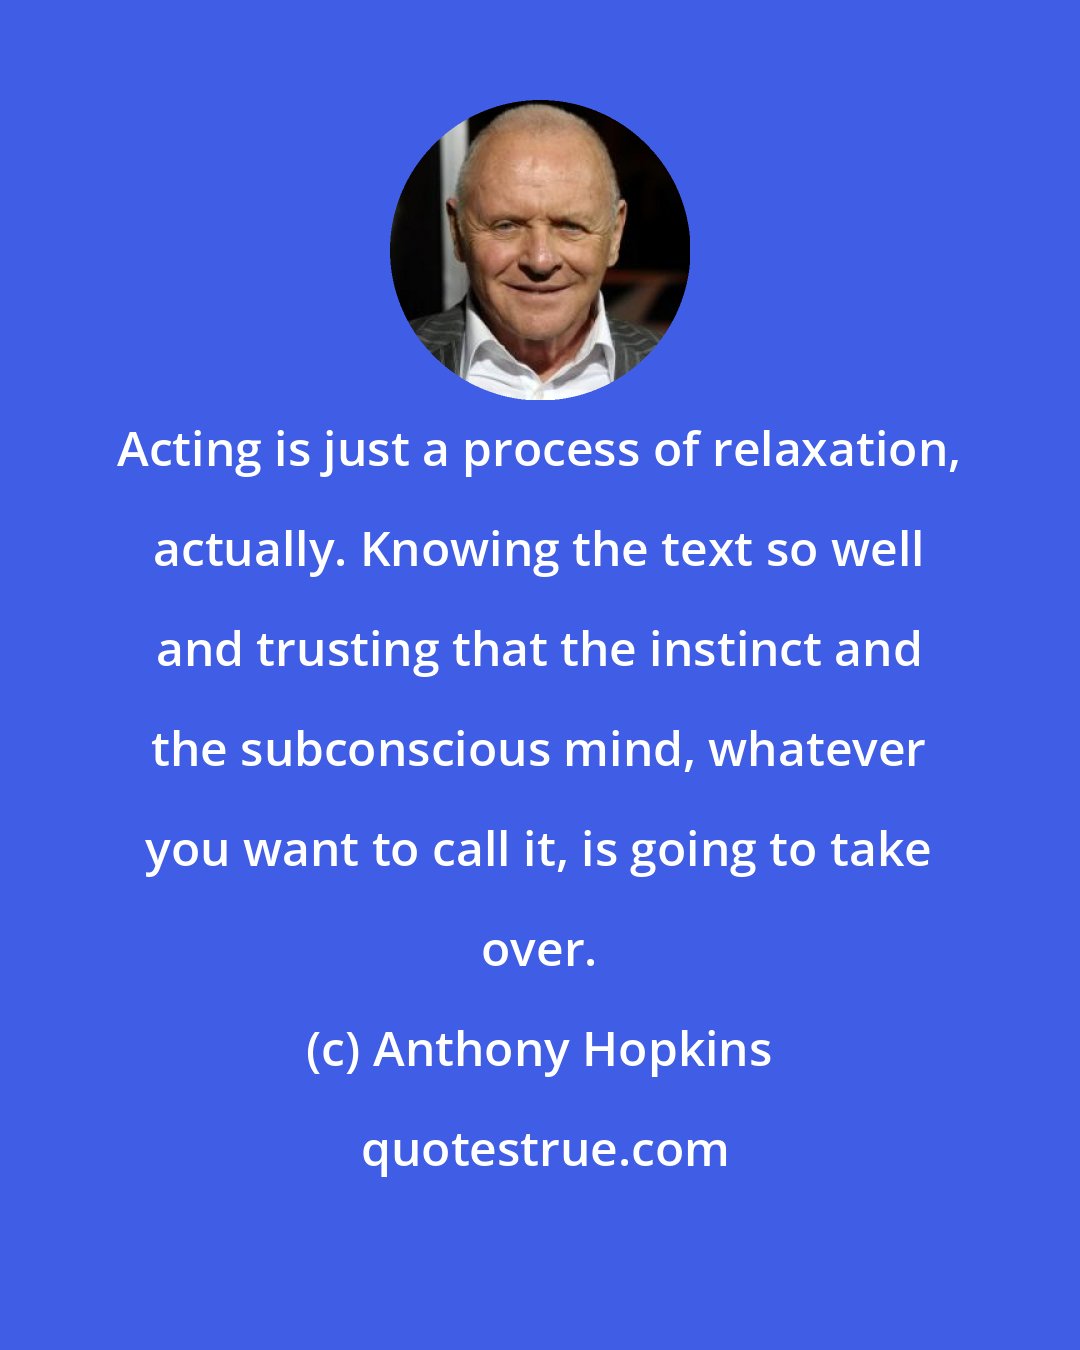 Anthony Hopkins: Acting is just a process of relaxation, actually. Knowing the text so well and trusting that the instinct and the subconscious mind, whatever you want to call it, is going to take over.